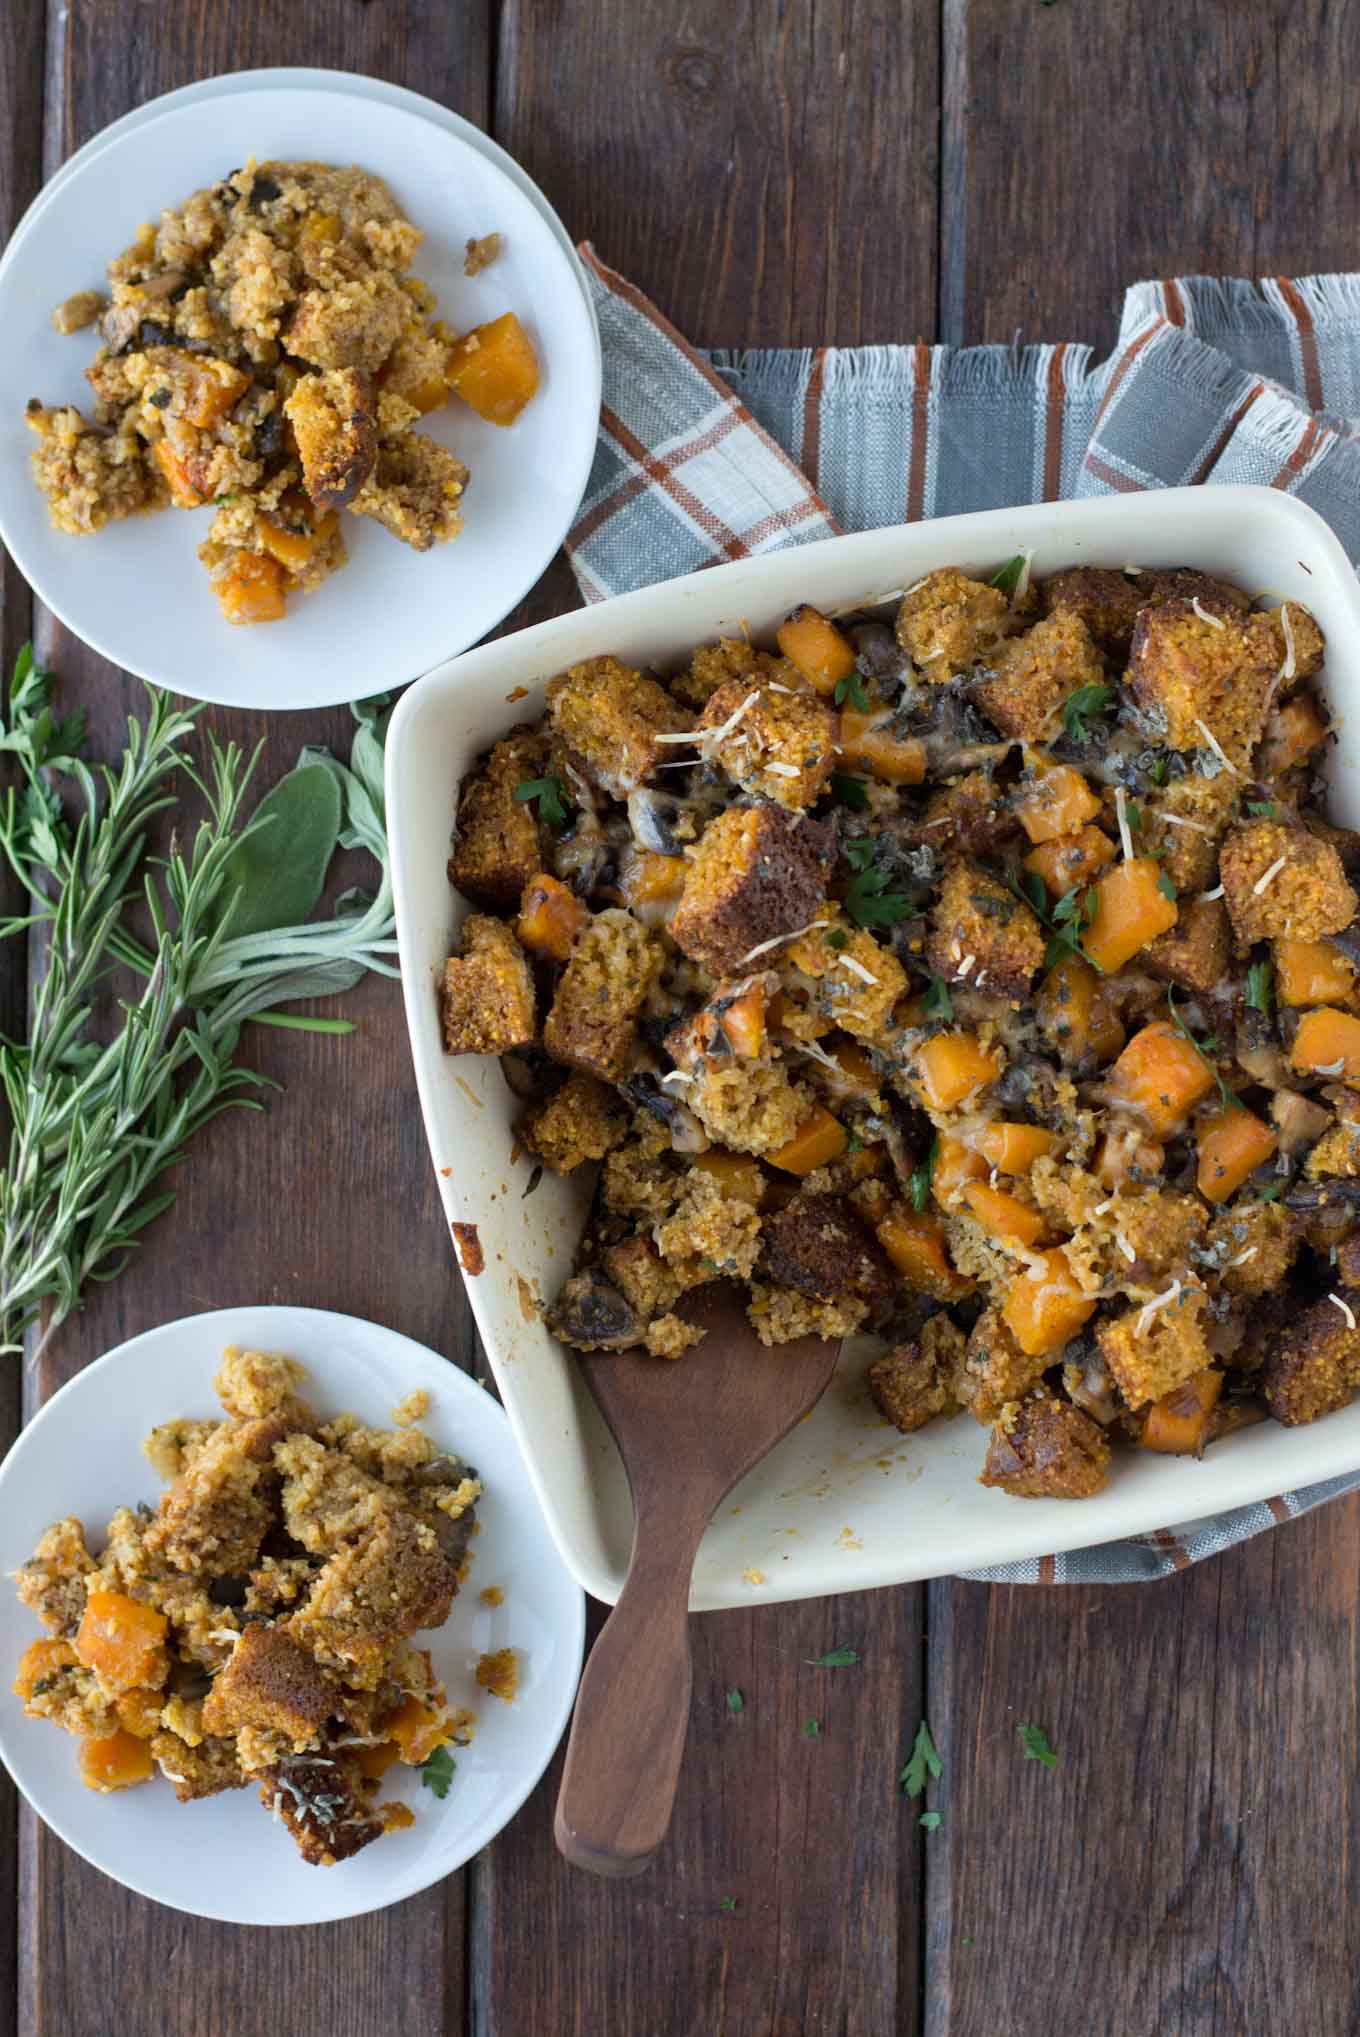 Fear Stuffing no more, check out this healthy and quick stuffing recipe that packs a big punch.